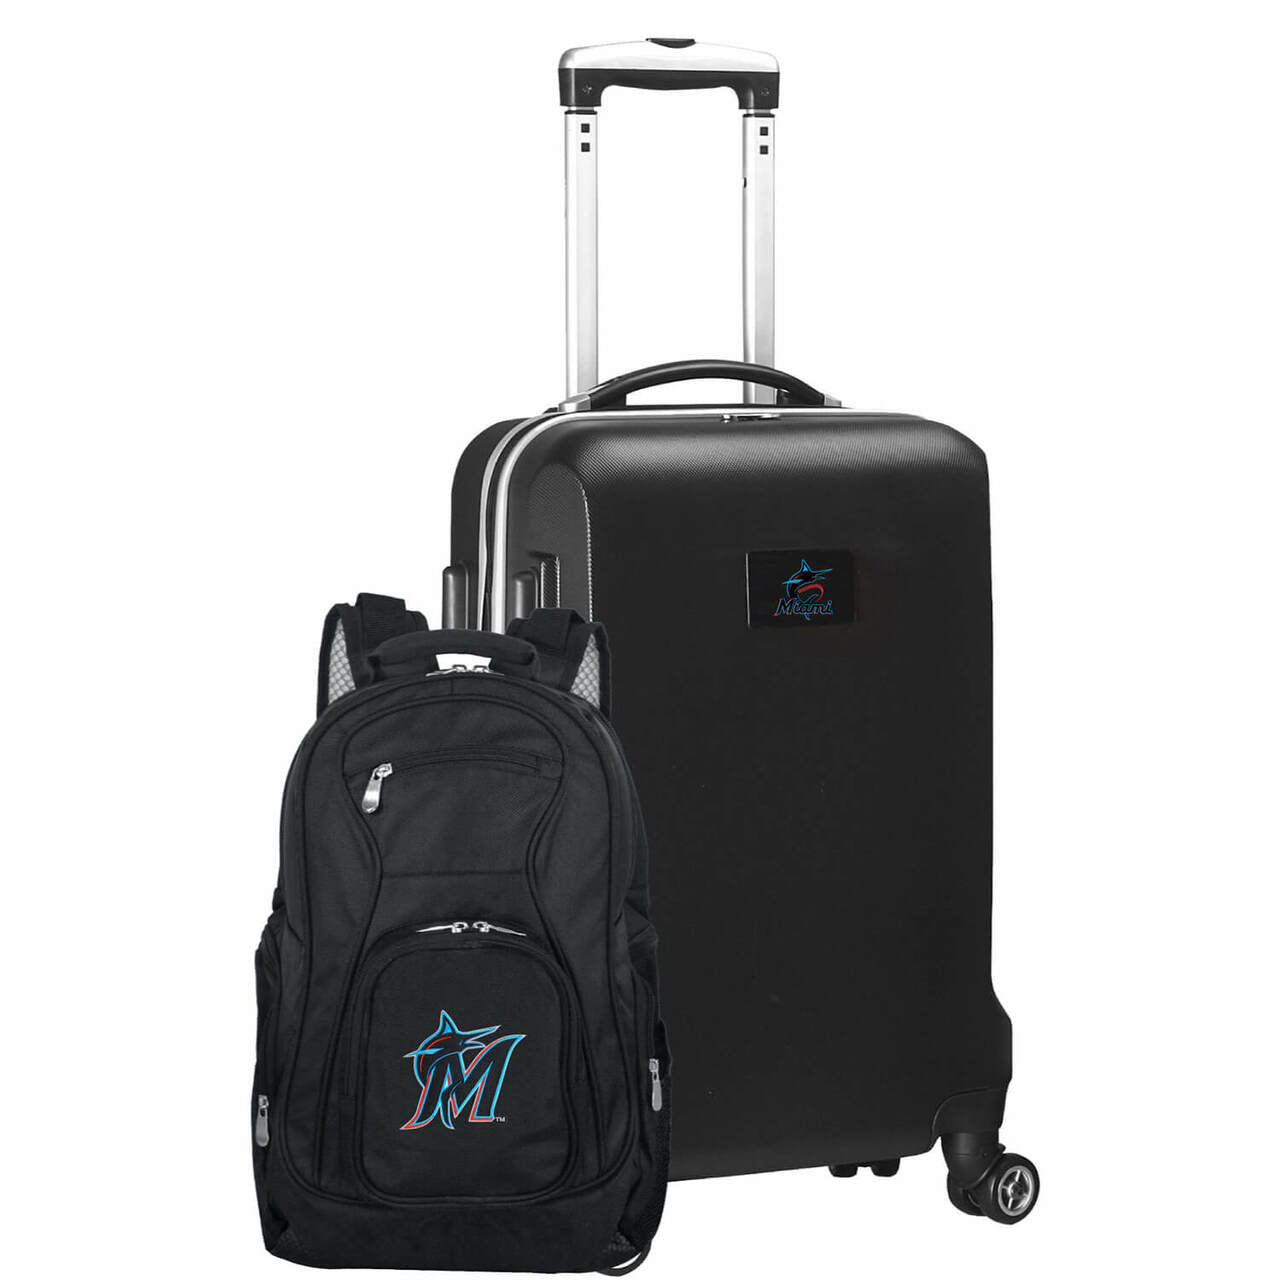 Miami Marlins Deluxe 2-Piece Backpack and Carry on Set in Black